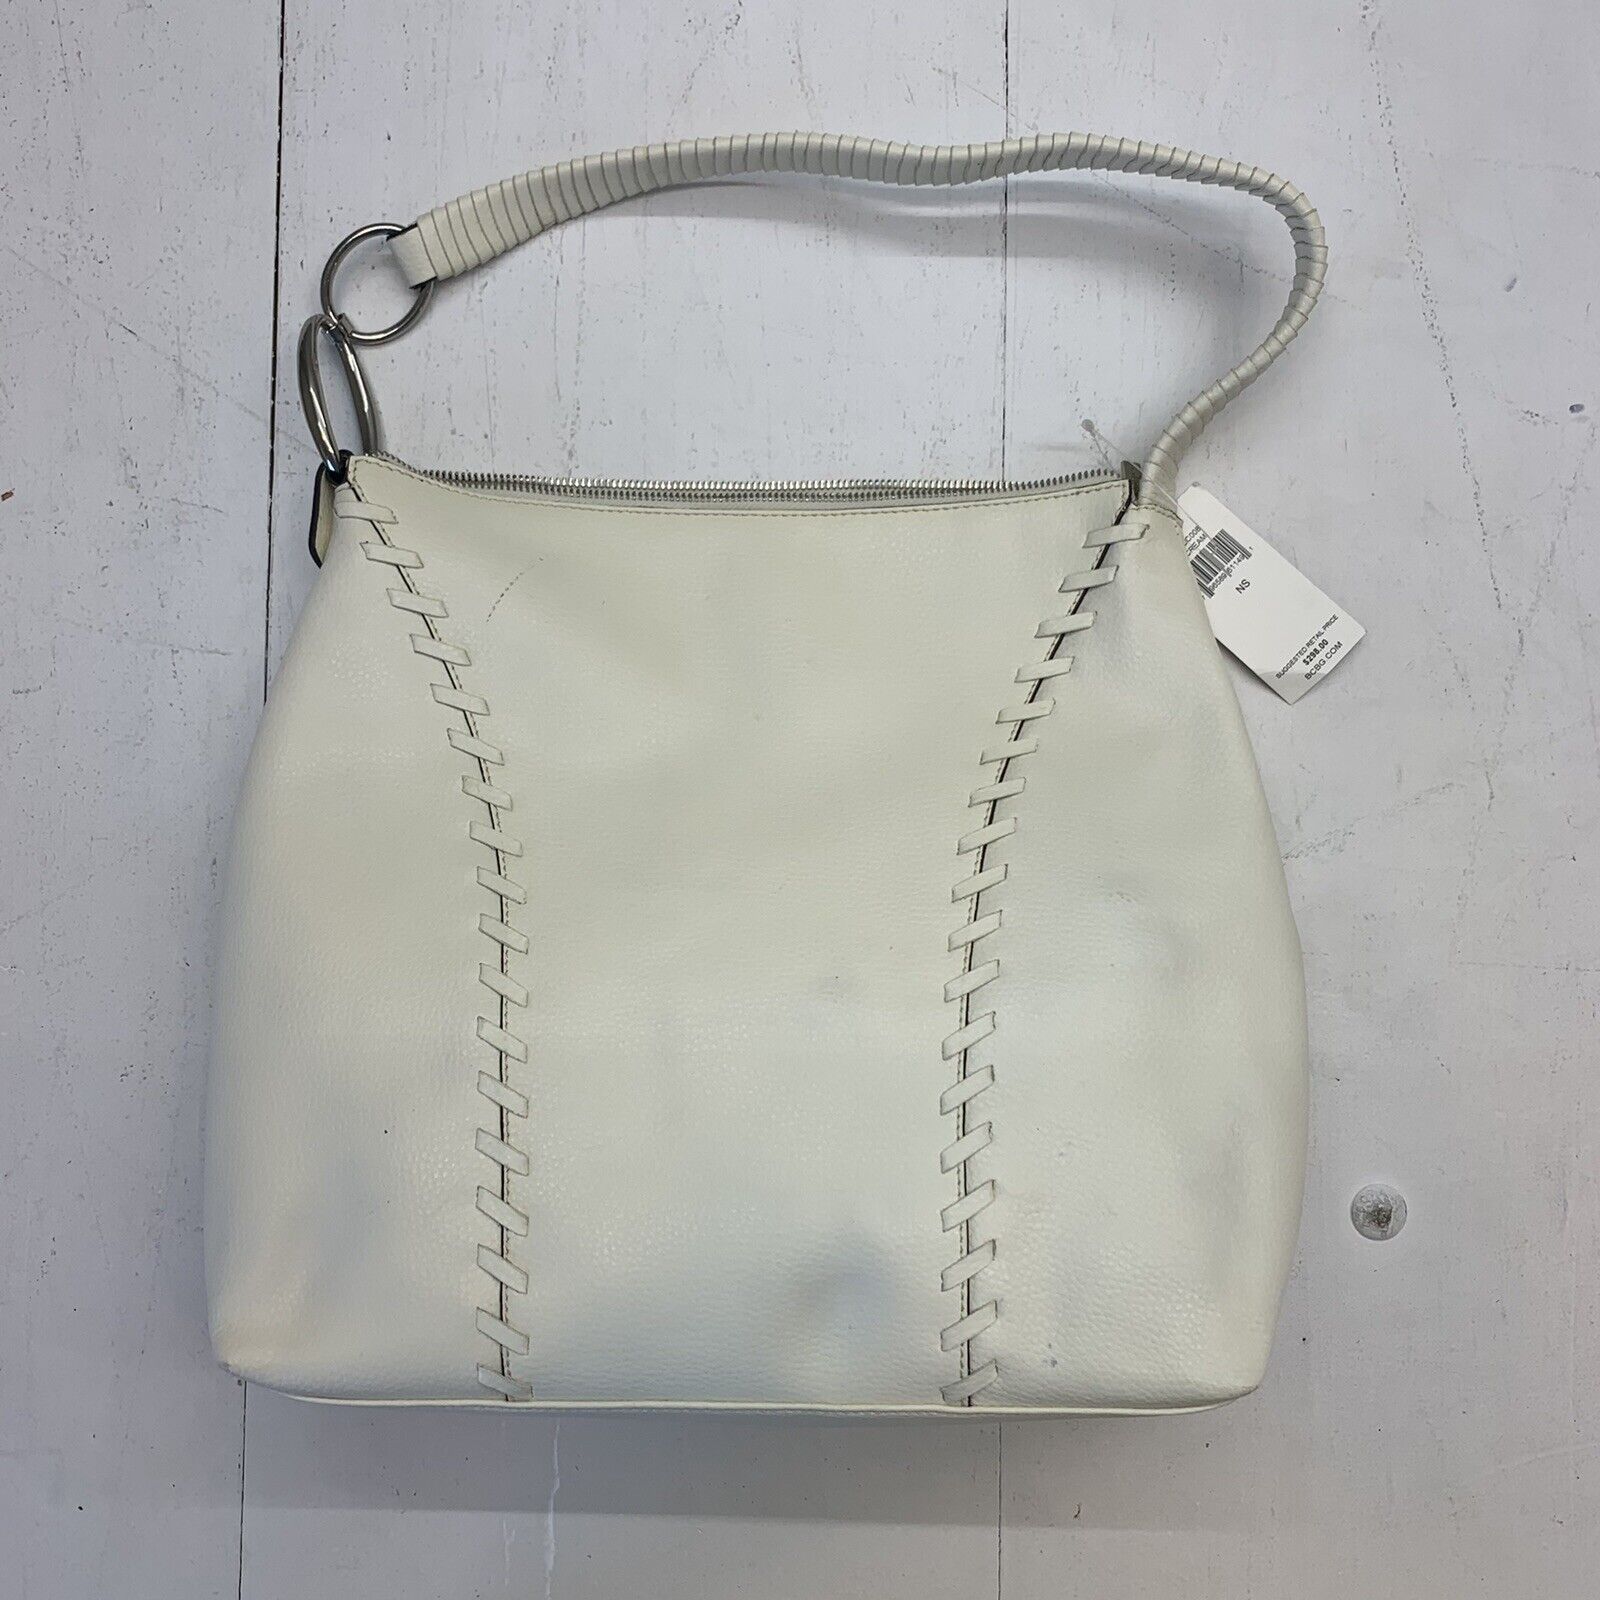 BCBG and LV Small purse haul a BCBG max azria and a 99% fake Louis Vuitton  that I love the authentic handbag will come someday. (My white whale) :  r/ThriftStoreHauls